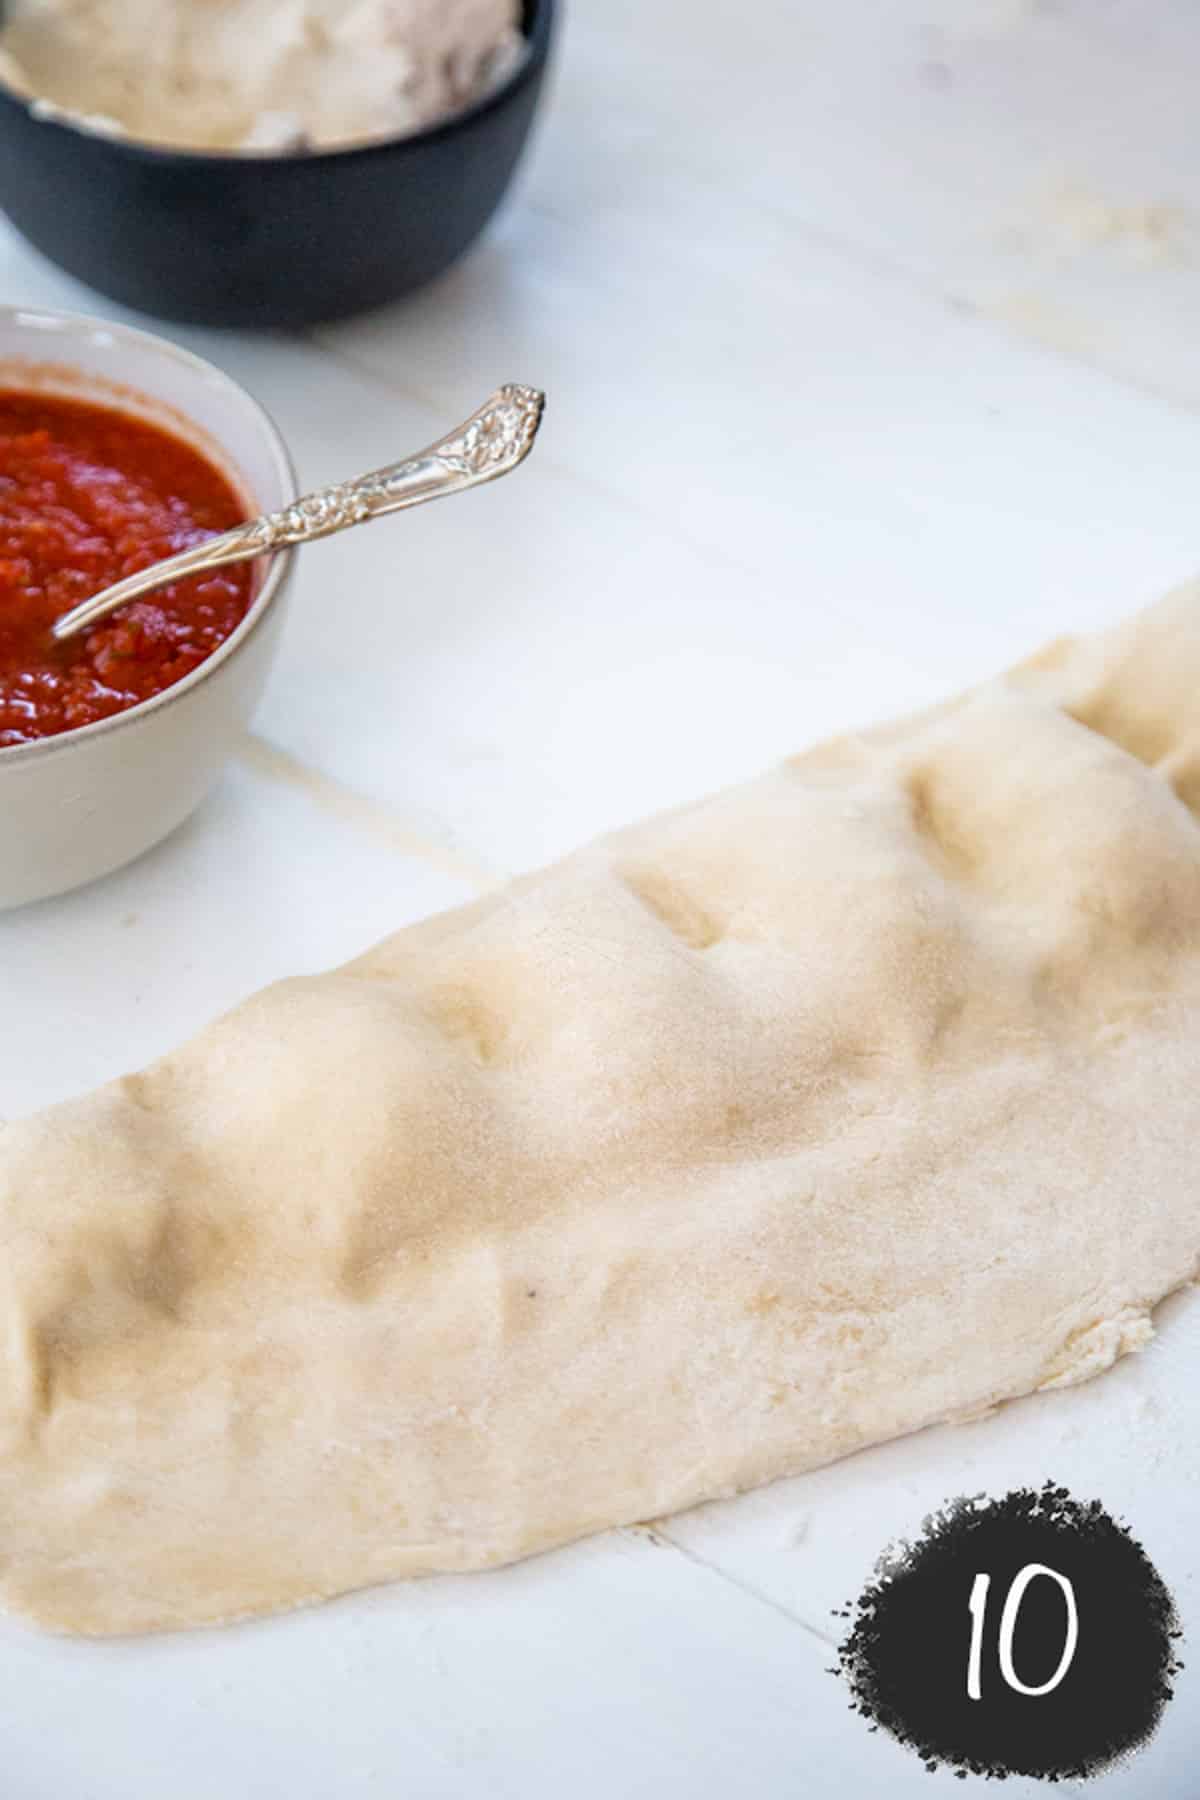 Pizza dough with a filling pressed into individual pizza pockets.